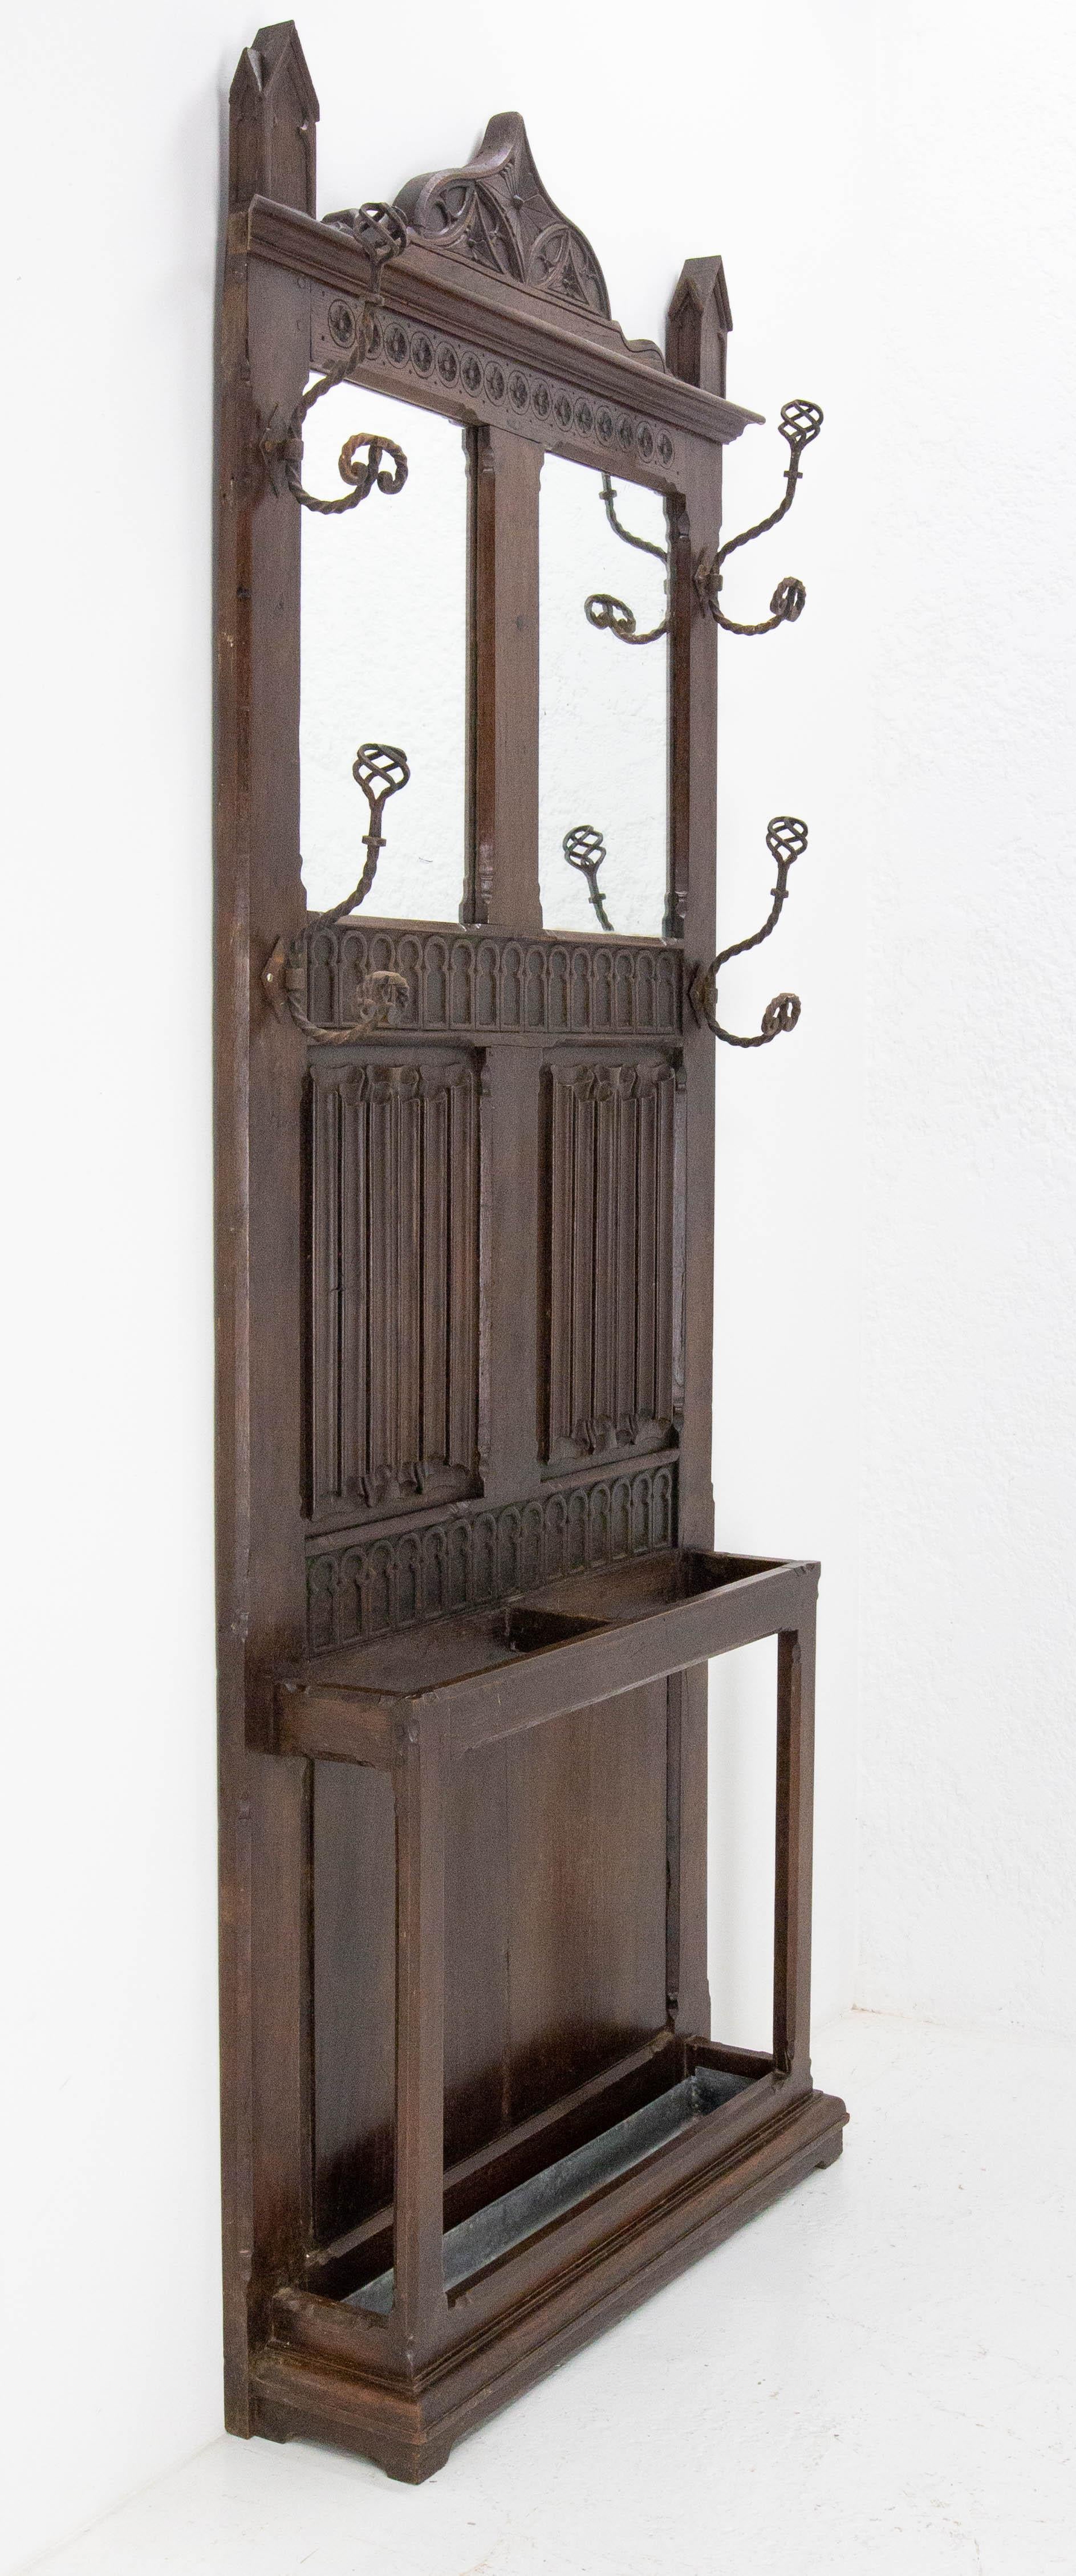 French 19th mid-century coat and hat rack hall stand
Carved oak in the gothic style and mirrors.
This type of furniture was placed near the front door and was used to prepare for going out. There was plenty of room for the clothes and accessories of